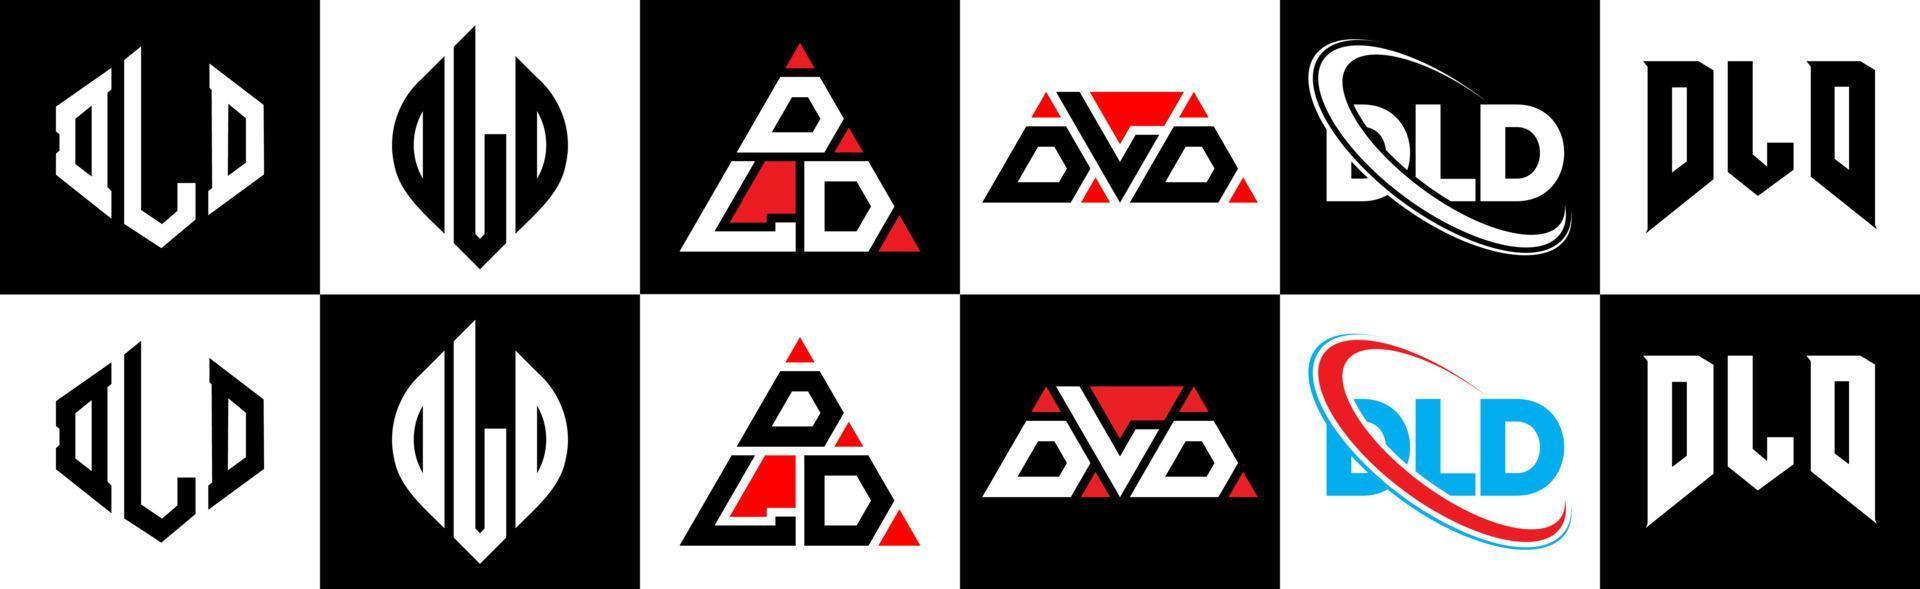 DLD letter logo design in six style. DLD polygon, circle, triangle, hexagon, flat and simple style with black and white color variation letter logo set in one artboard. DLD minimalist and classic logo vector